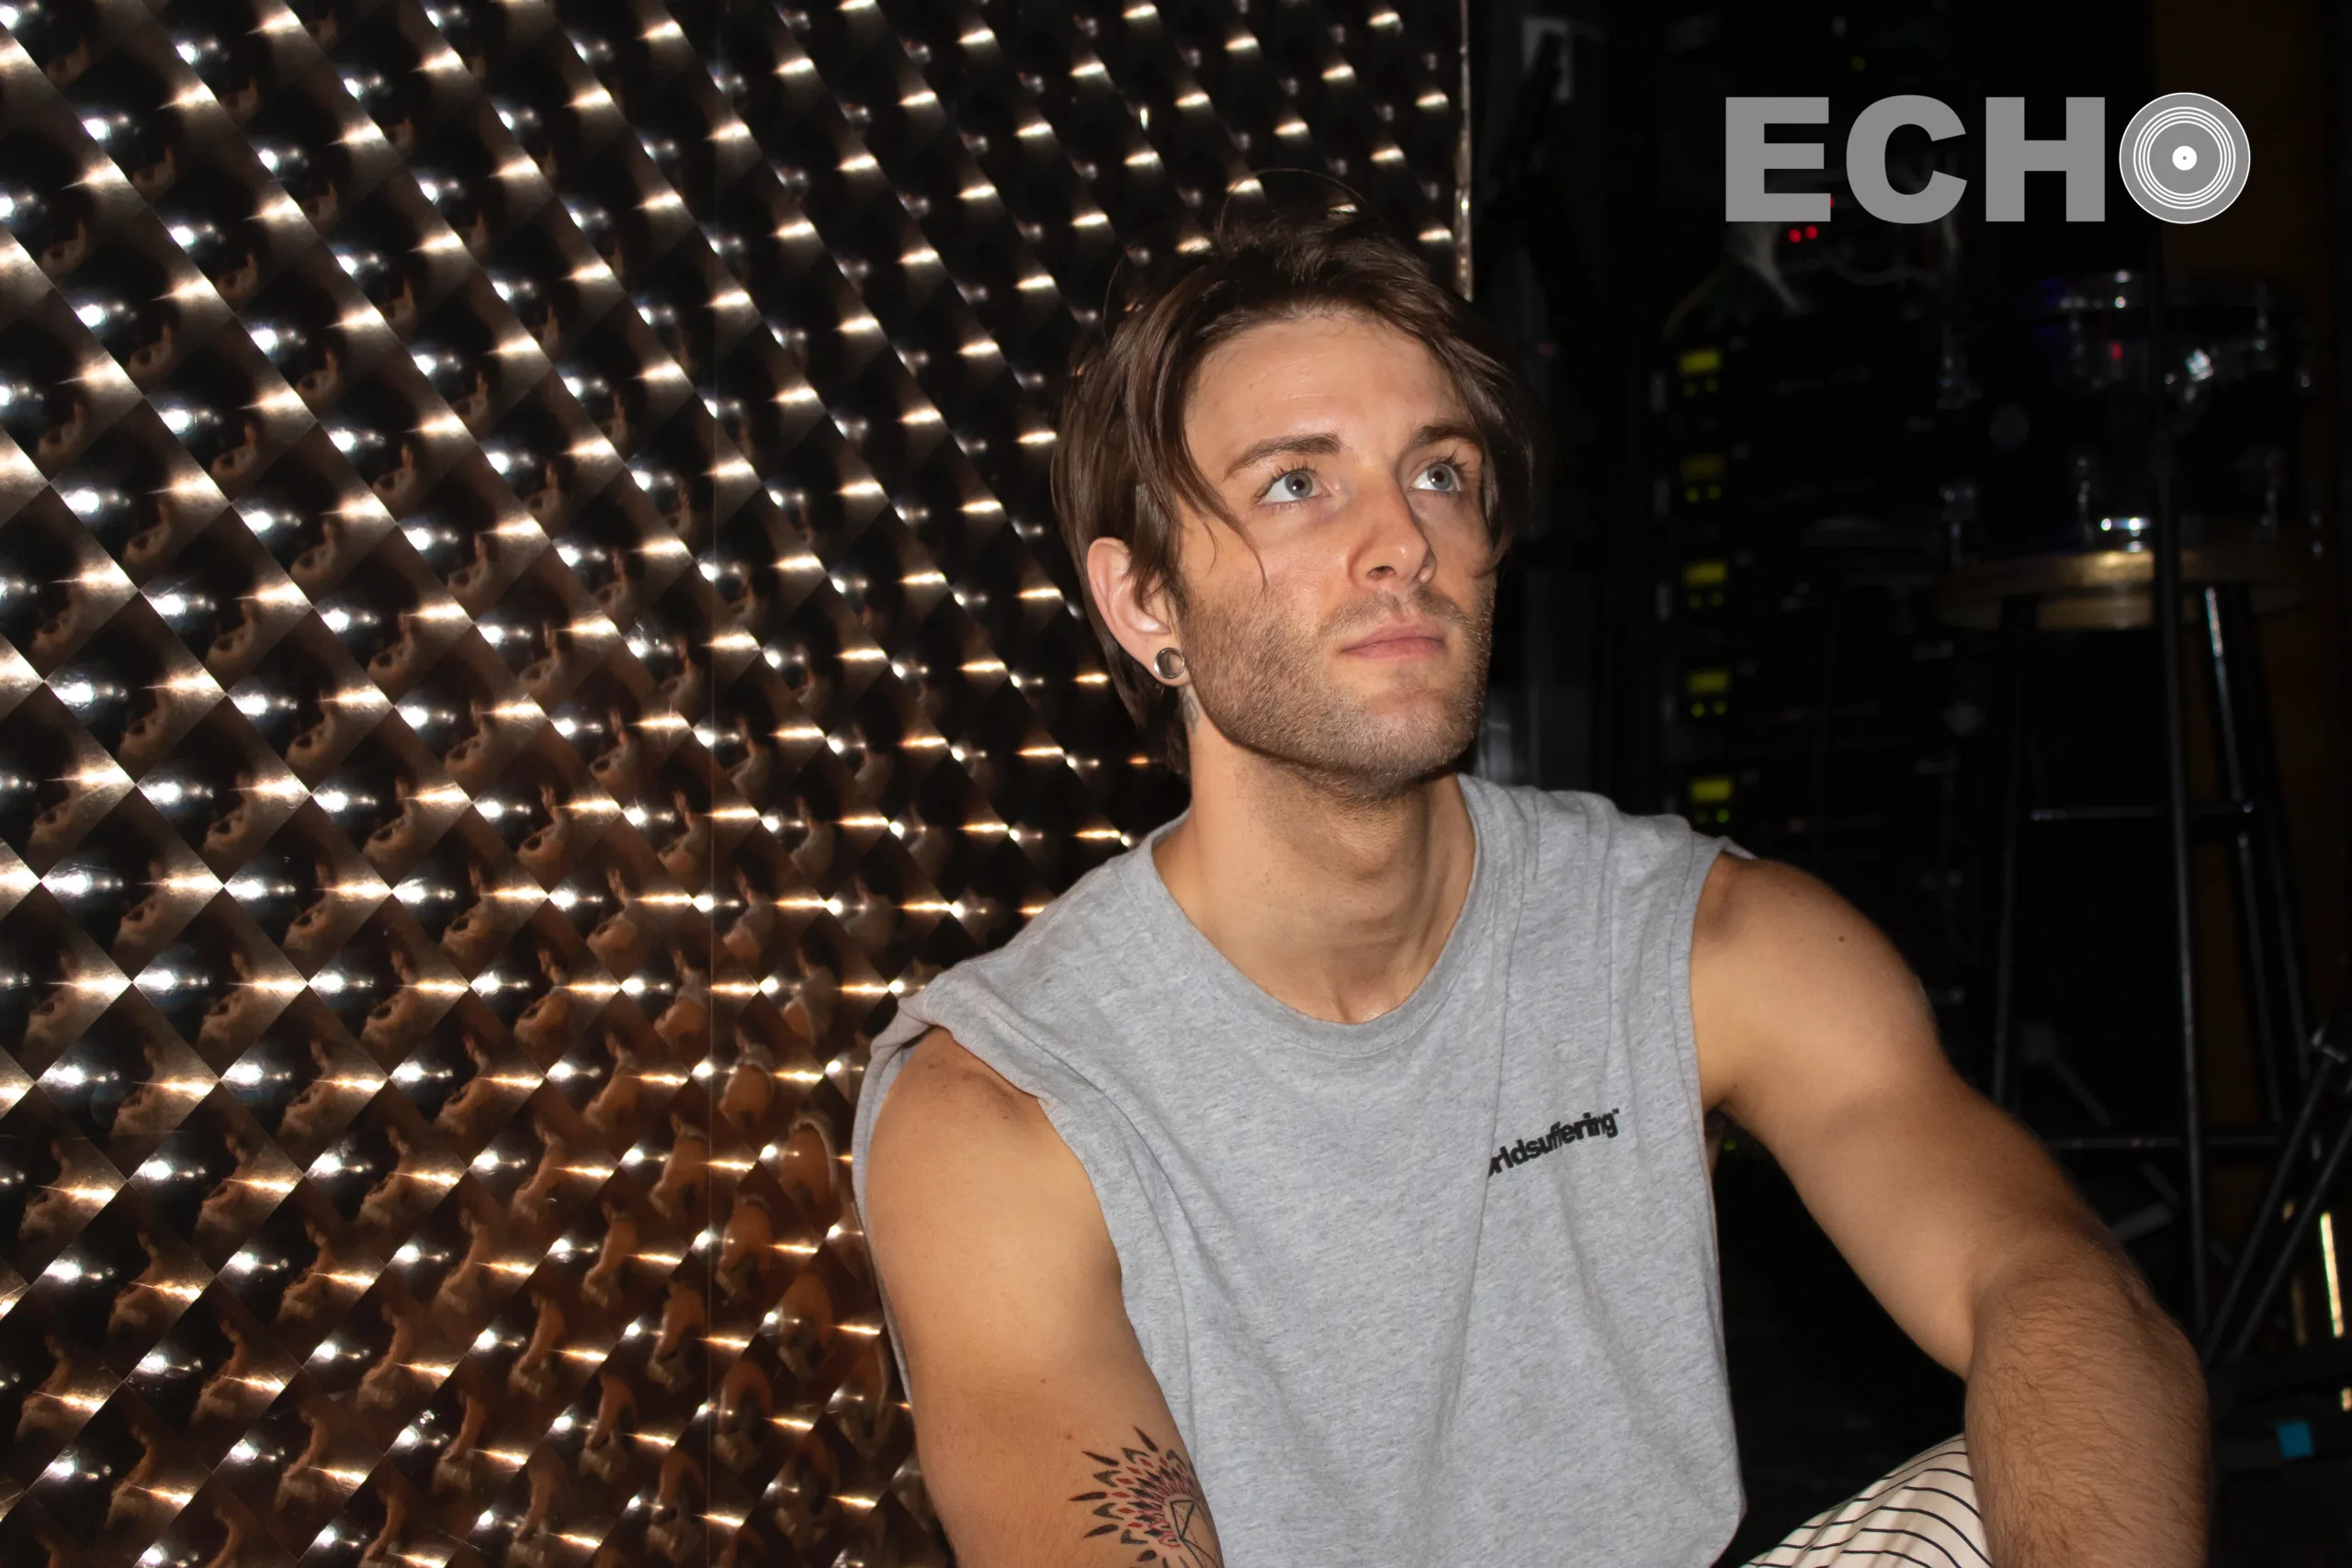 EXCLUSIVE: Drew Chadwick Talks Planned Album, Inspiration and More - ECHO